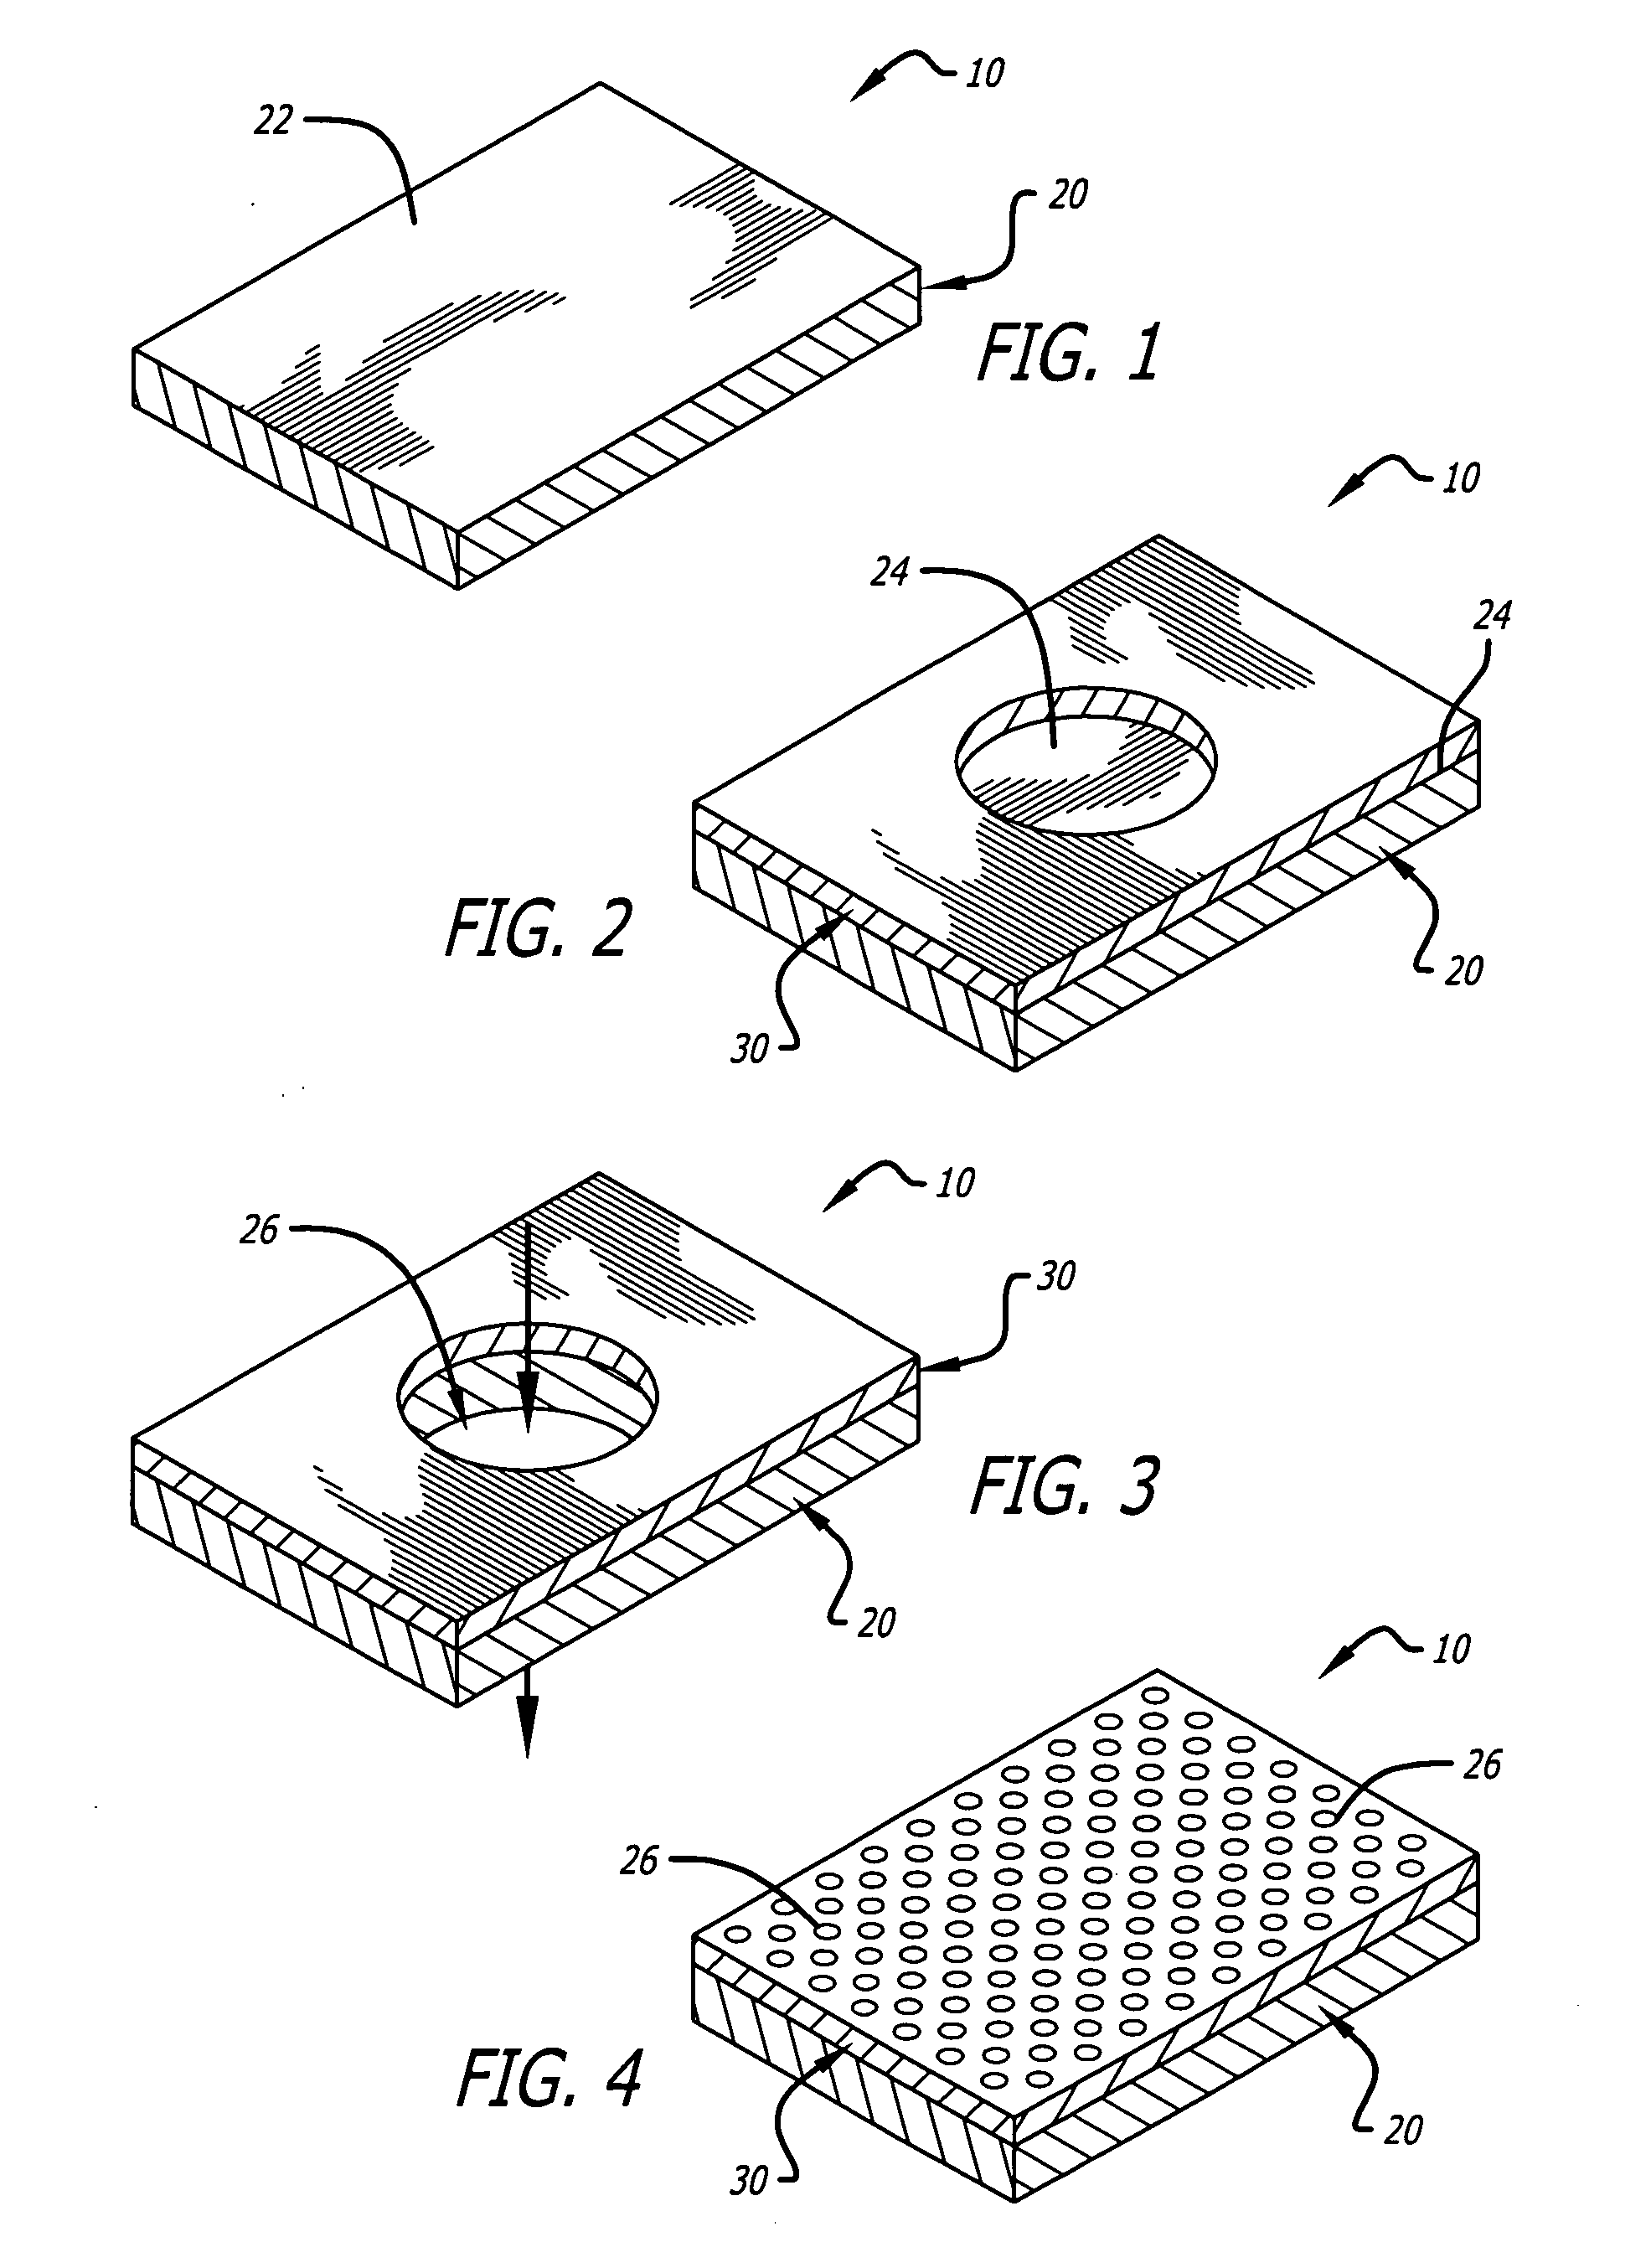 Embolic filter device and related systems and methods